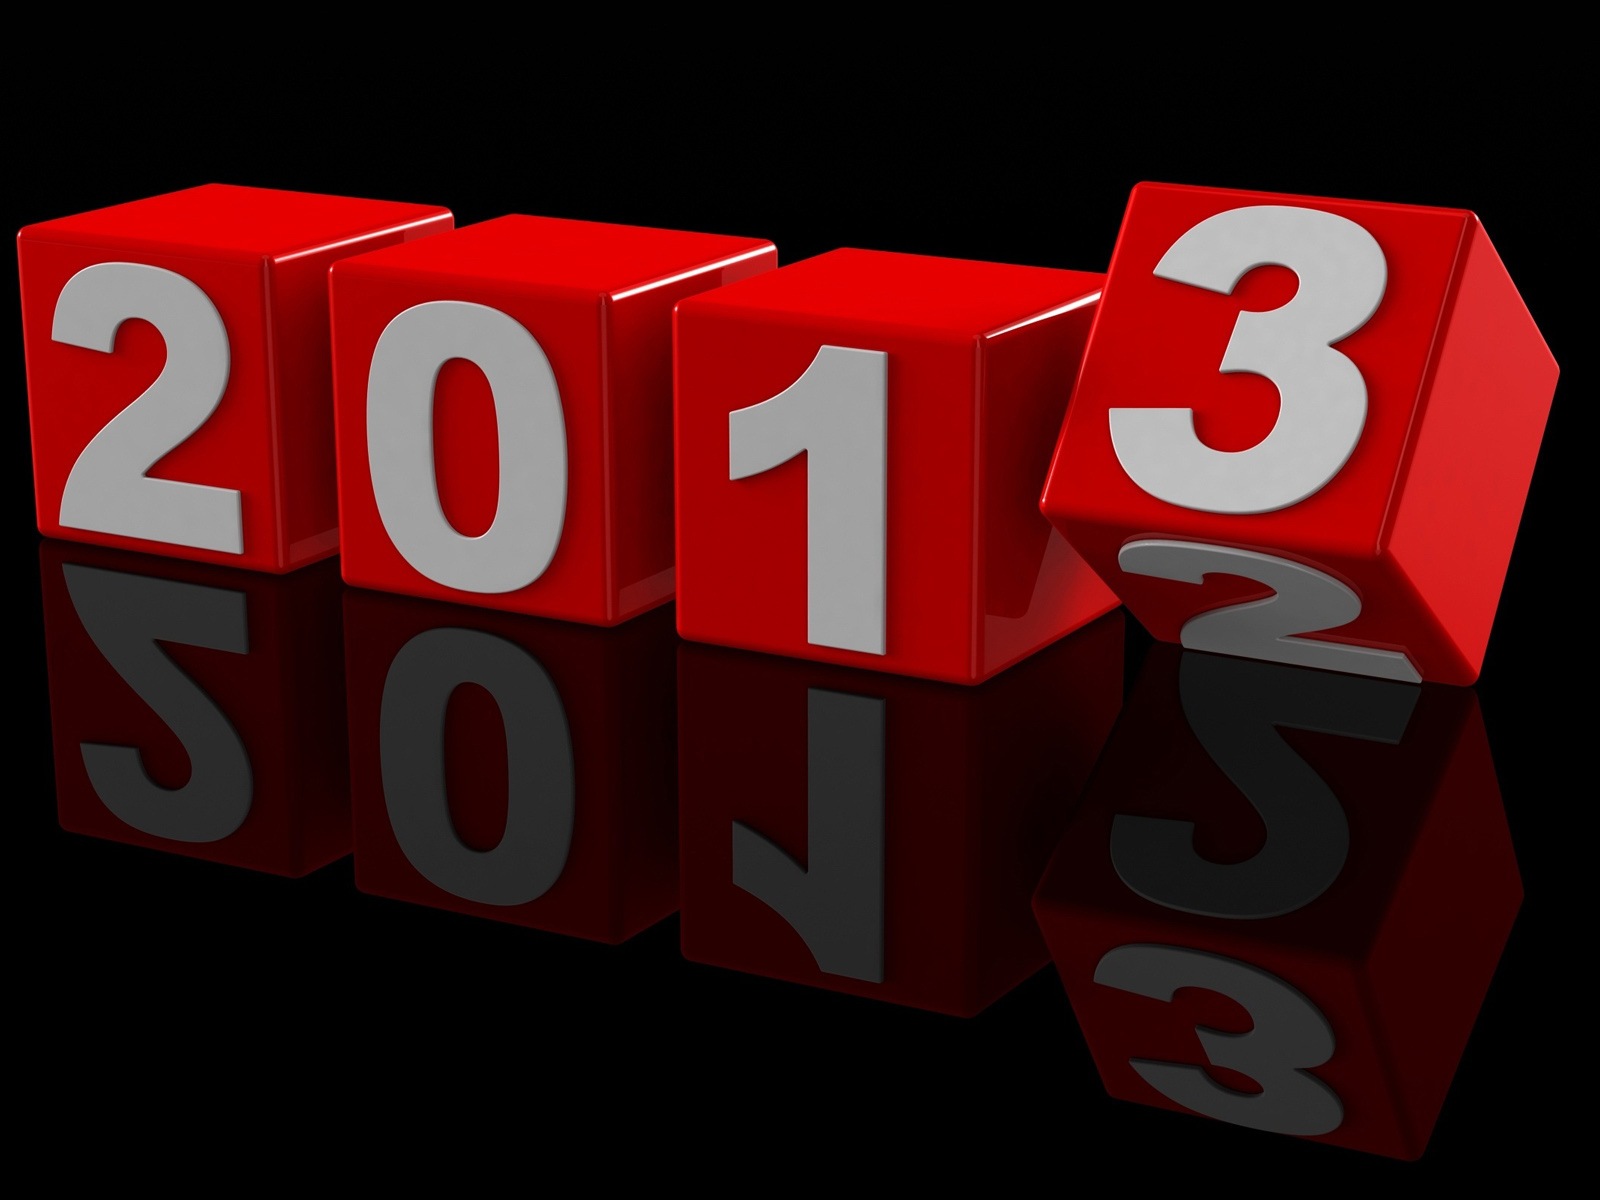 2013 Happy New Year HD wallpapers #10 - 1600x1200